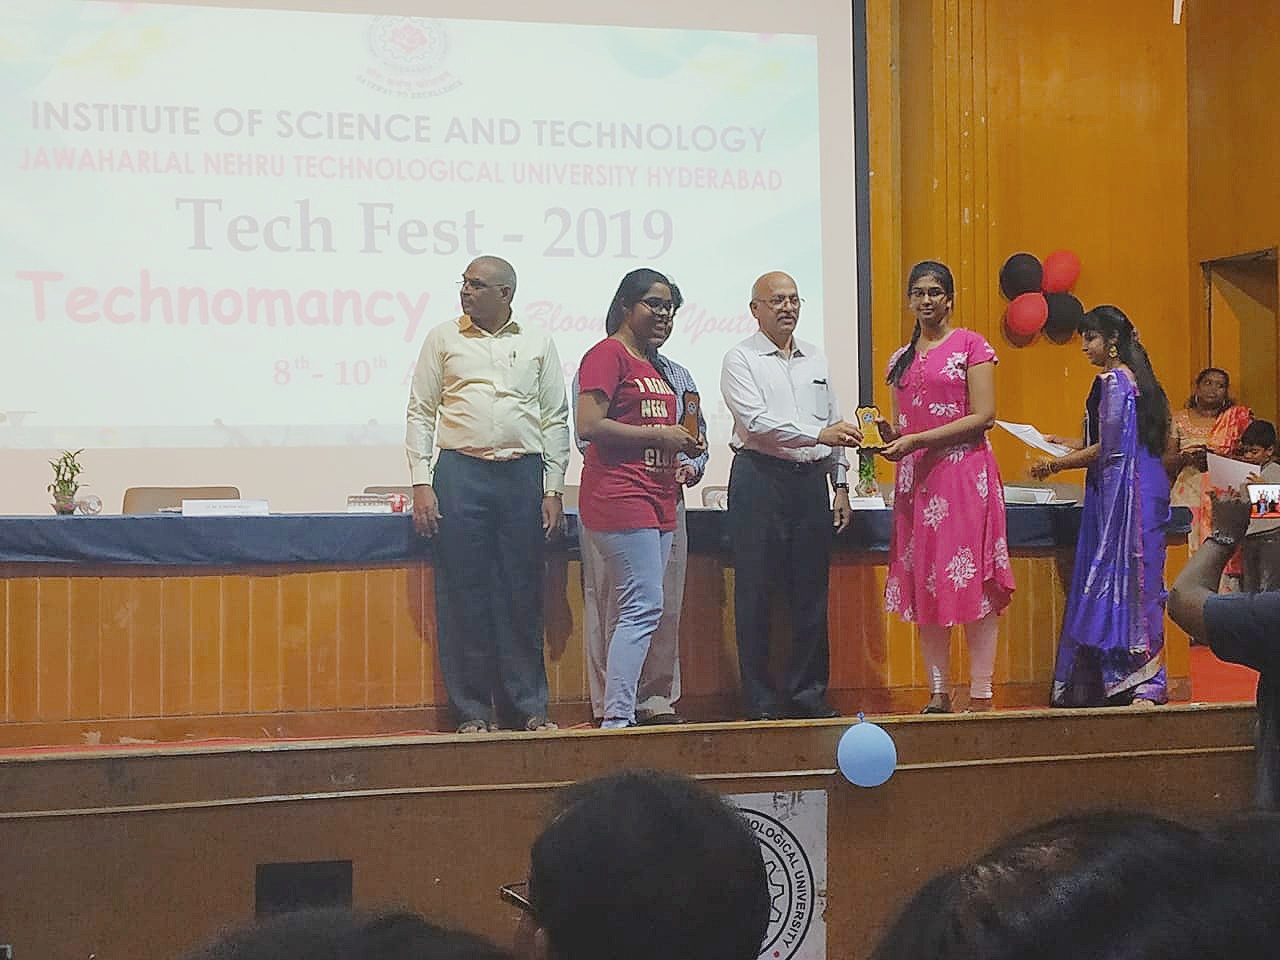 Stood as runner-up in poster presentation in Technical Fest -2019 organized by JNTUH